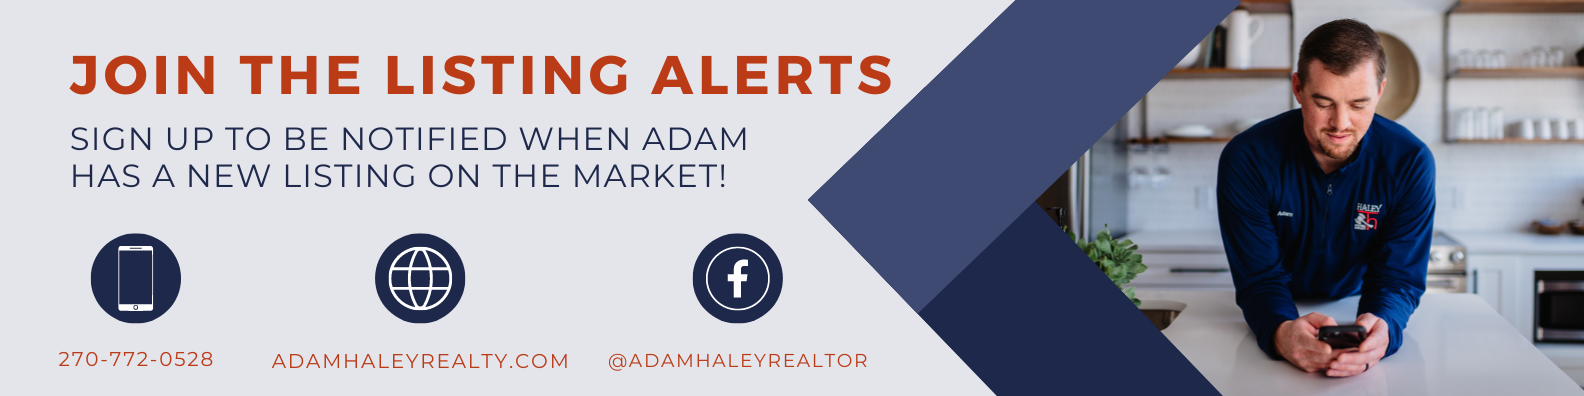 Join the listing alerts! Sign up to be notified when Adam has a new listing on the market!